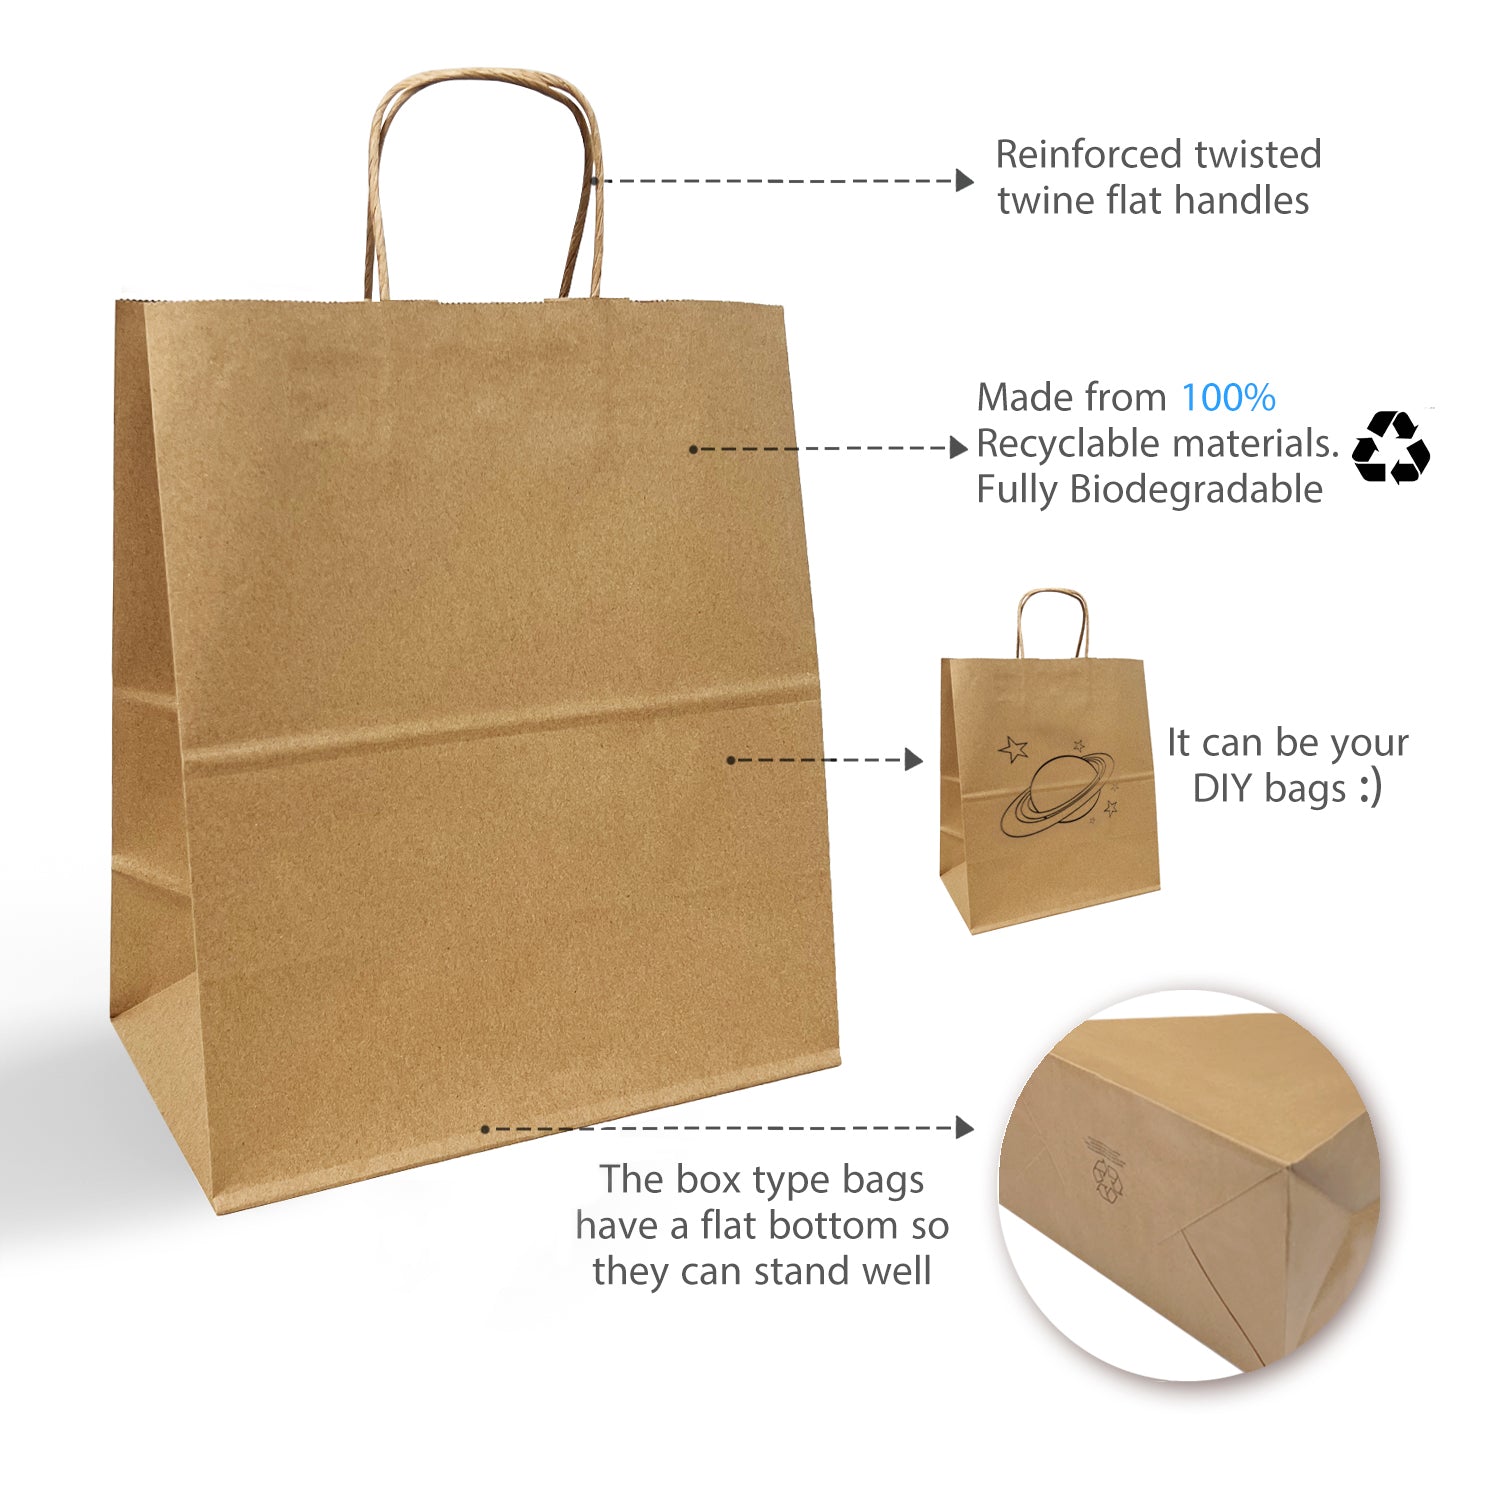 250 Pcs, Winnie, 12x7x14 inches, Kraft Paper Bags, with Twisted Handle